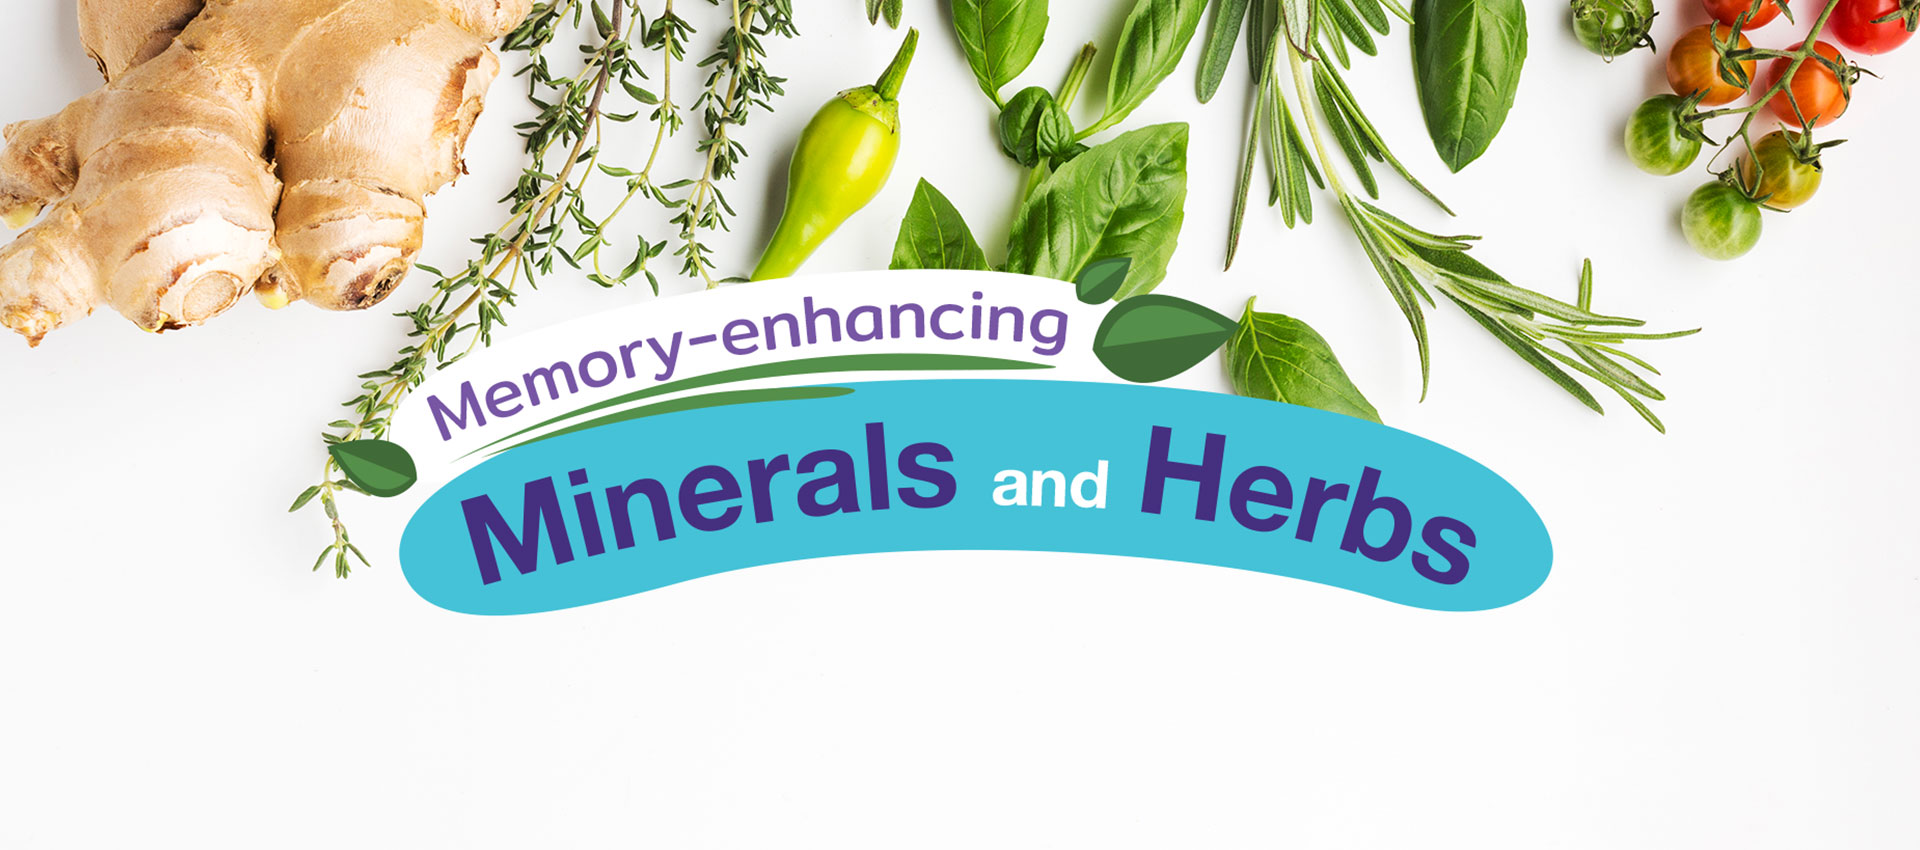 Memory-enhancing minerals and herbs